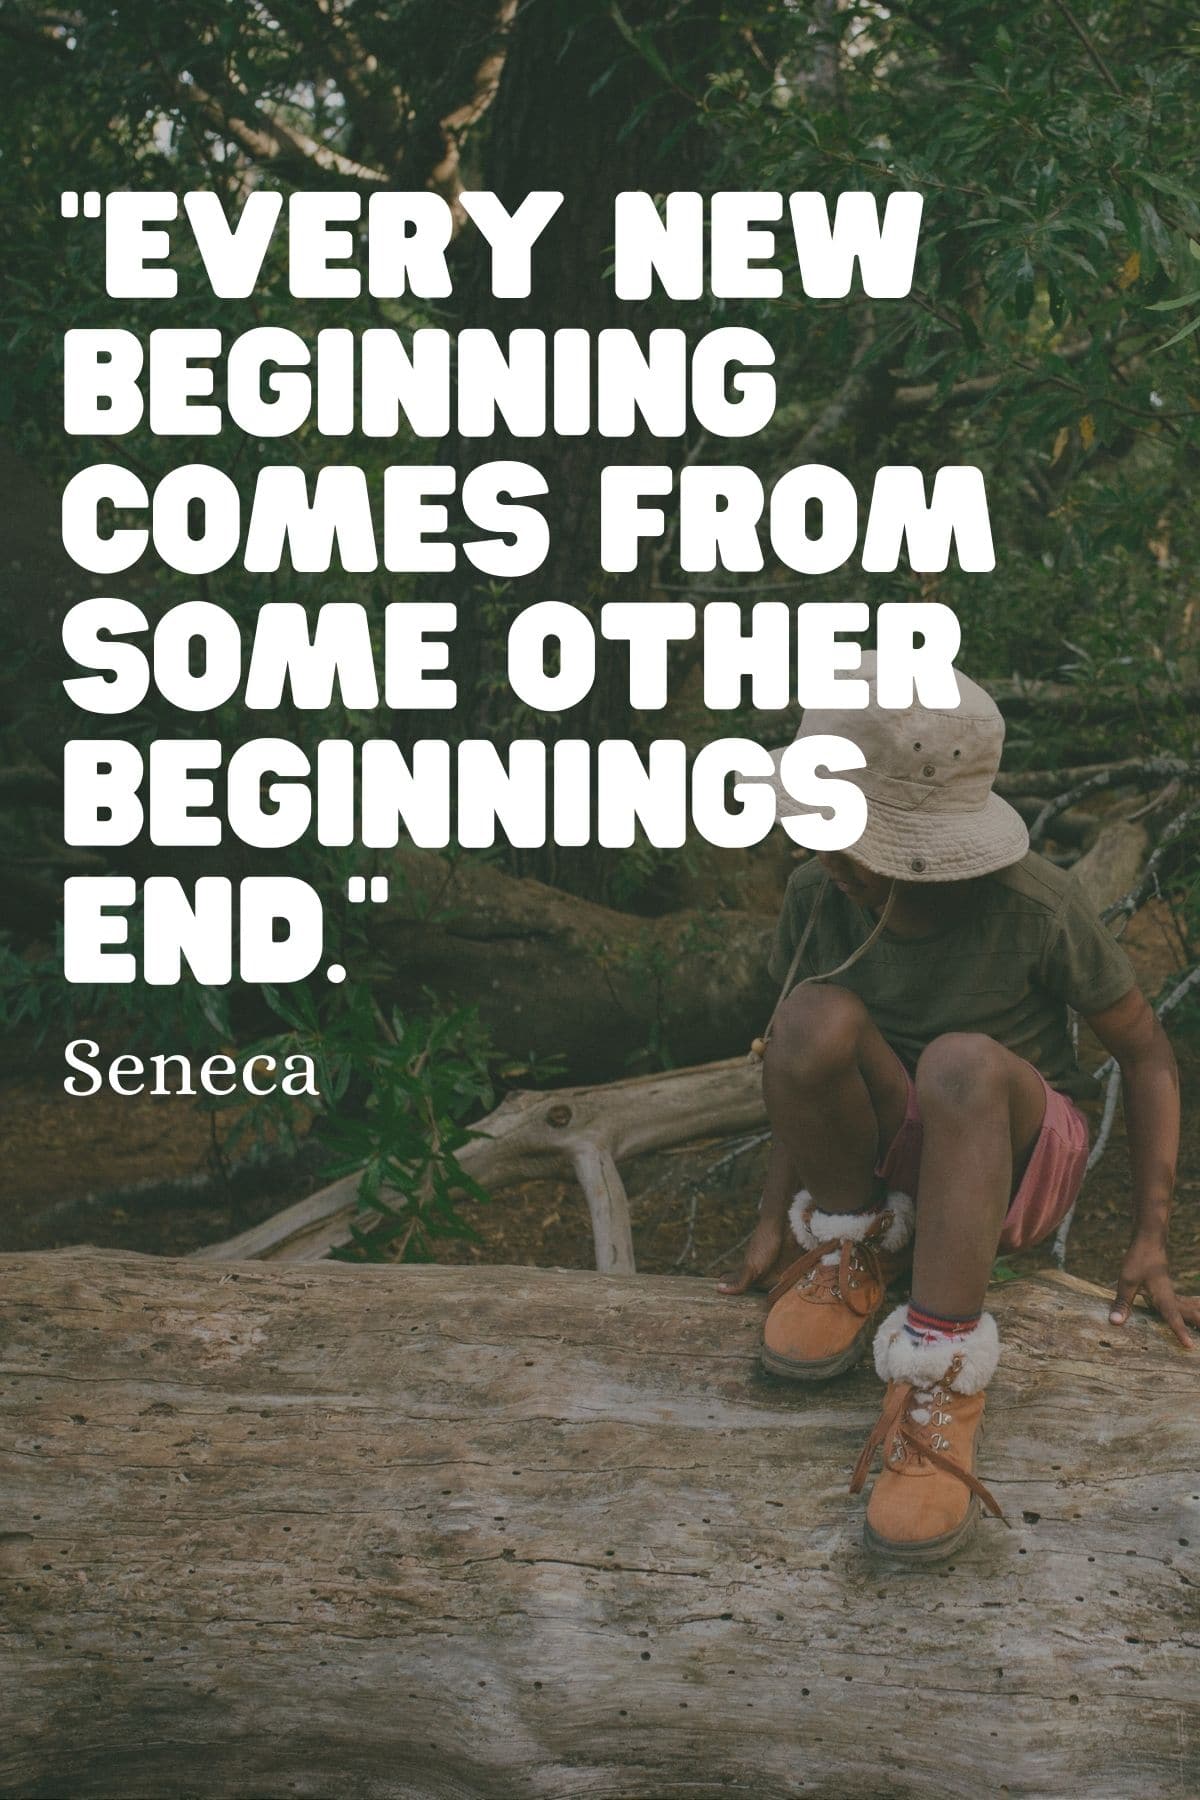 "Every new beginning comes from some other beginnings end." – Seneca quote